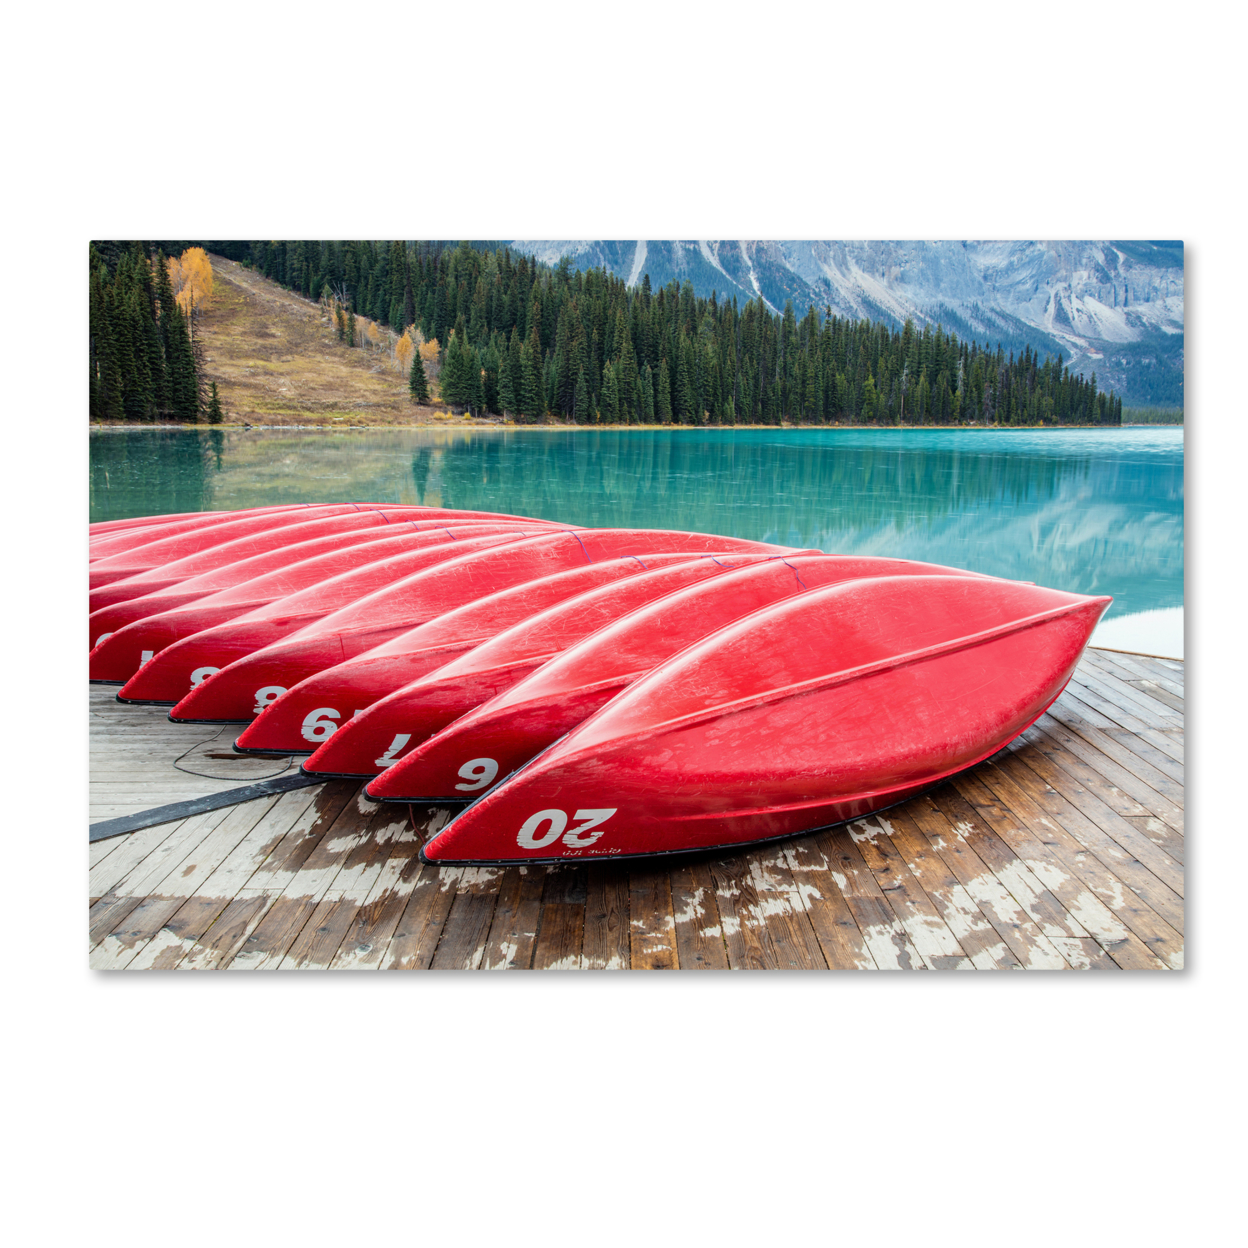 Pierre Leclerc 'Red Canoes Of Emerald Lake' Canvas Art 16 X 24